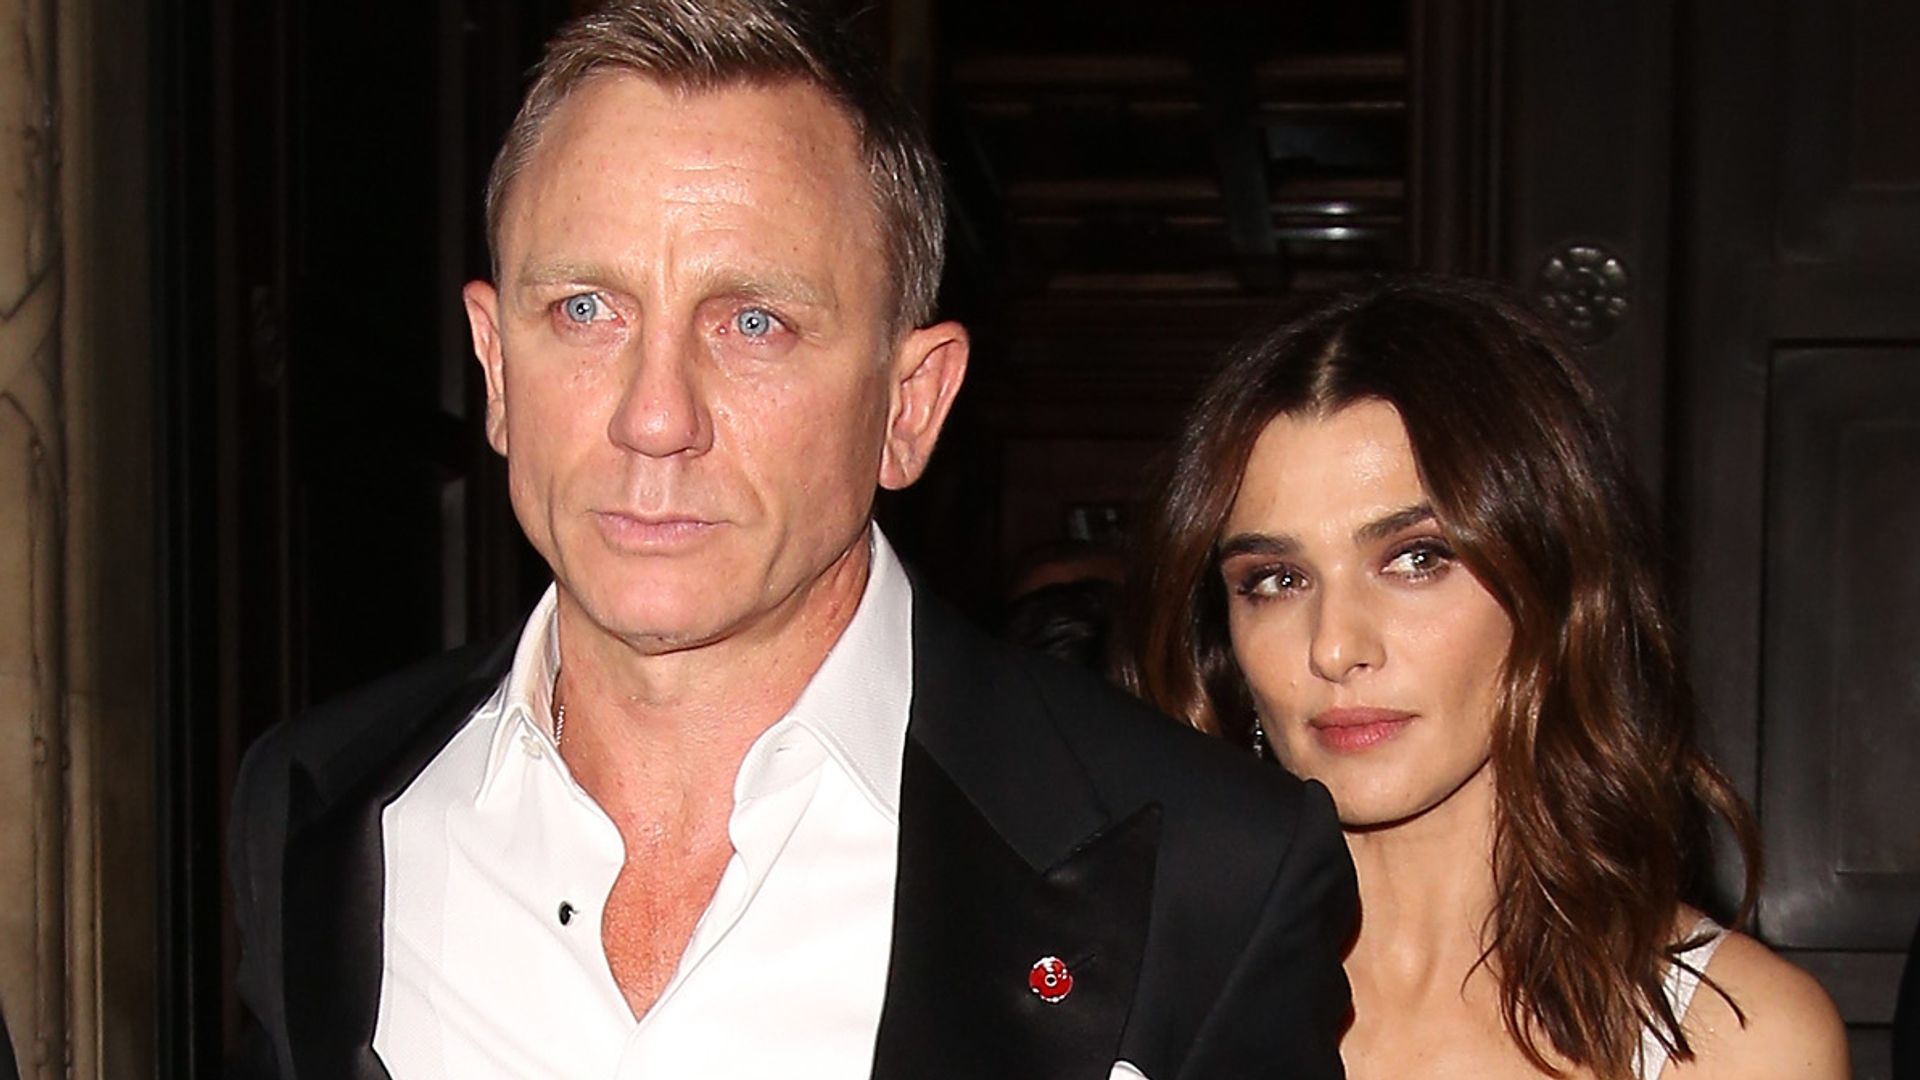 Daniel Craig in a suit and Rachel Weisz in a floral dress attending the Spectre Premiere after party in 2015